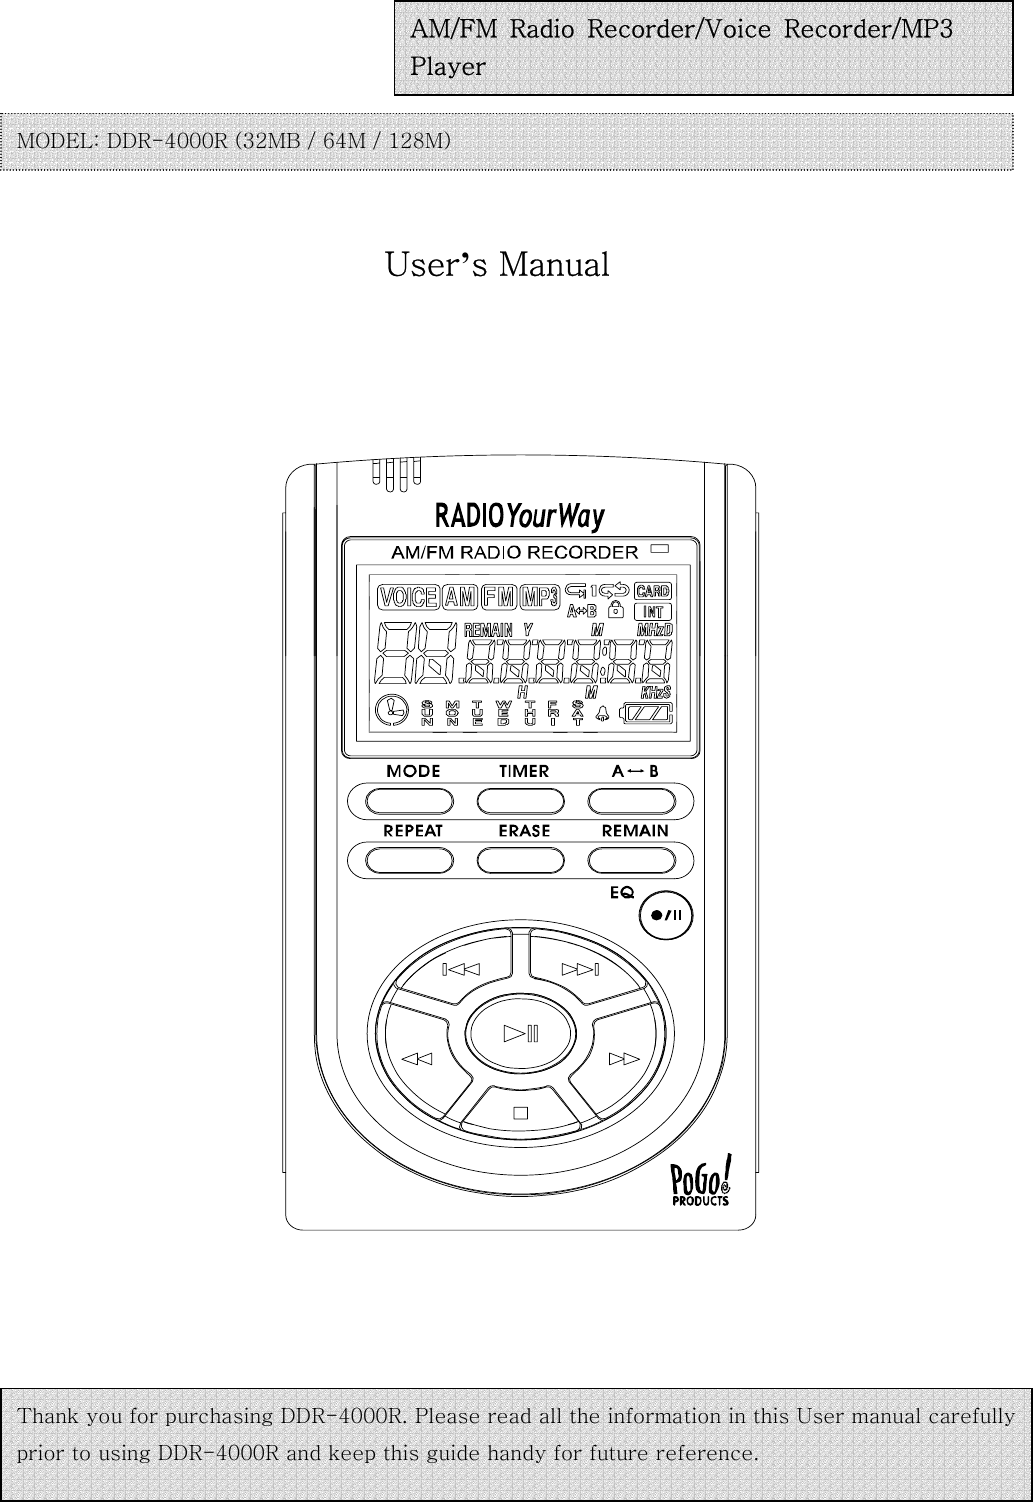                                                User’s Manual                                    AM/FM  Radio  Recorder/Voice  Recorder/MP3   Player MODEL: DDR-4000R (32MB / 64M / 128M)   Thank you for purchasing DDR-4000R. Please read all the information in this User manual carefully prior to using DDR-4000R and keep this guide handy for future reference.   